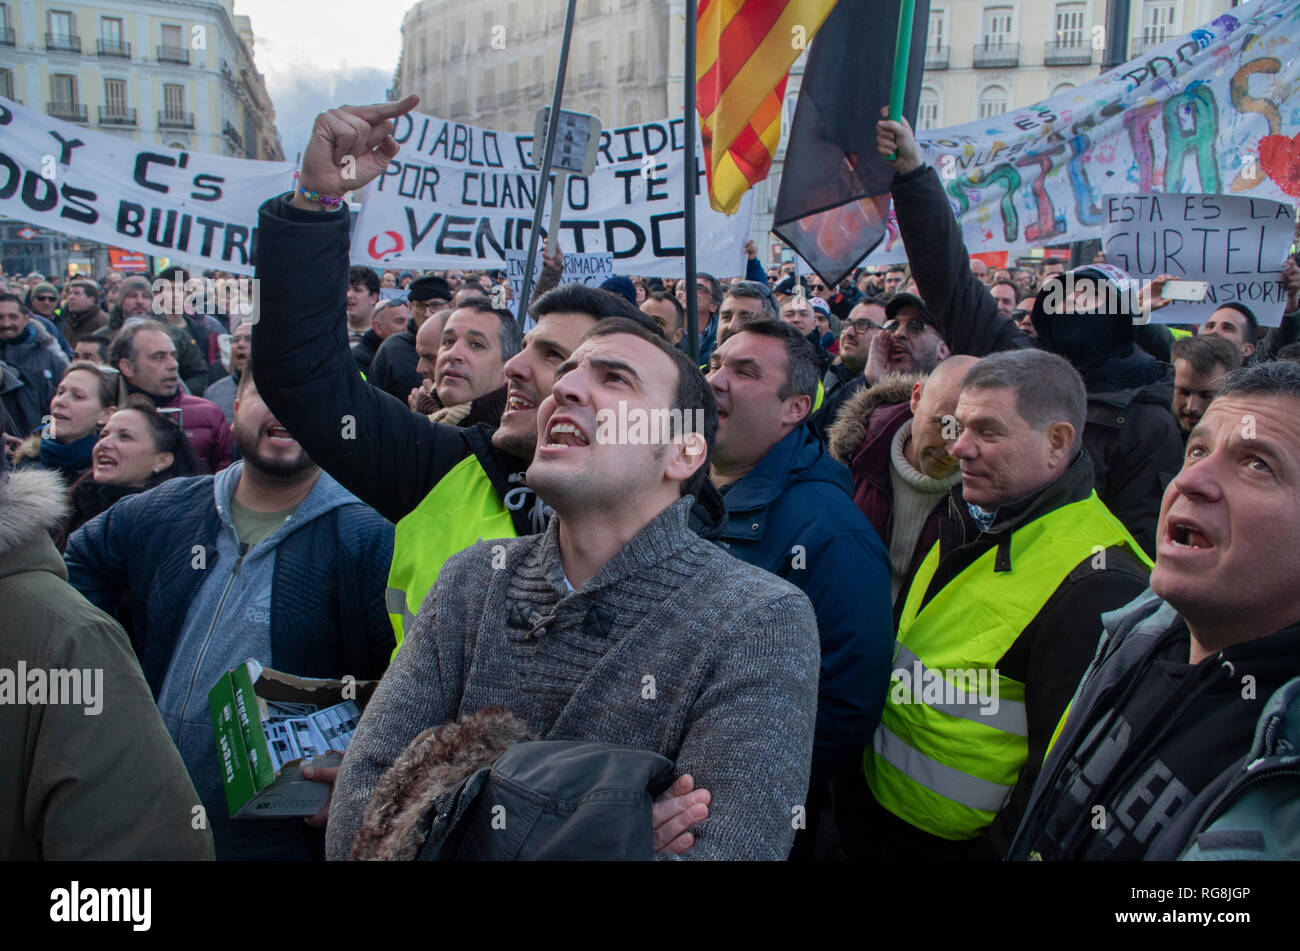 Madrid, Spain. 28th January 2019. Taxi drivers in Madrid have been on a strike for more than a week demanding the prohibition of Uber and Cabify in the Spanish capital-city.   Due to a lack of agreement, hundreds of taxi drivers protested at Puerta del Sol, Madrid’s central square.  In the picture taxi drivers are angrily protesting. Credit: Lora Grigorova/Alamy Live News Stock Photo